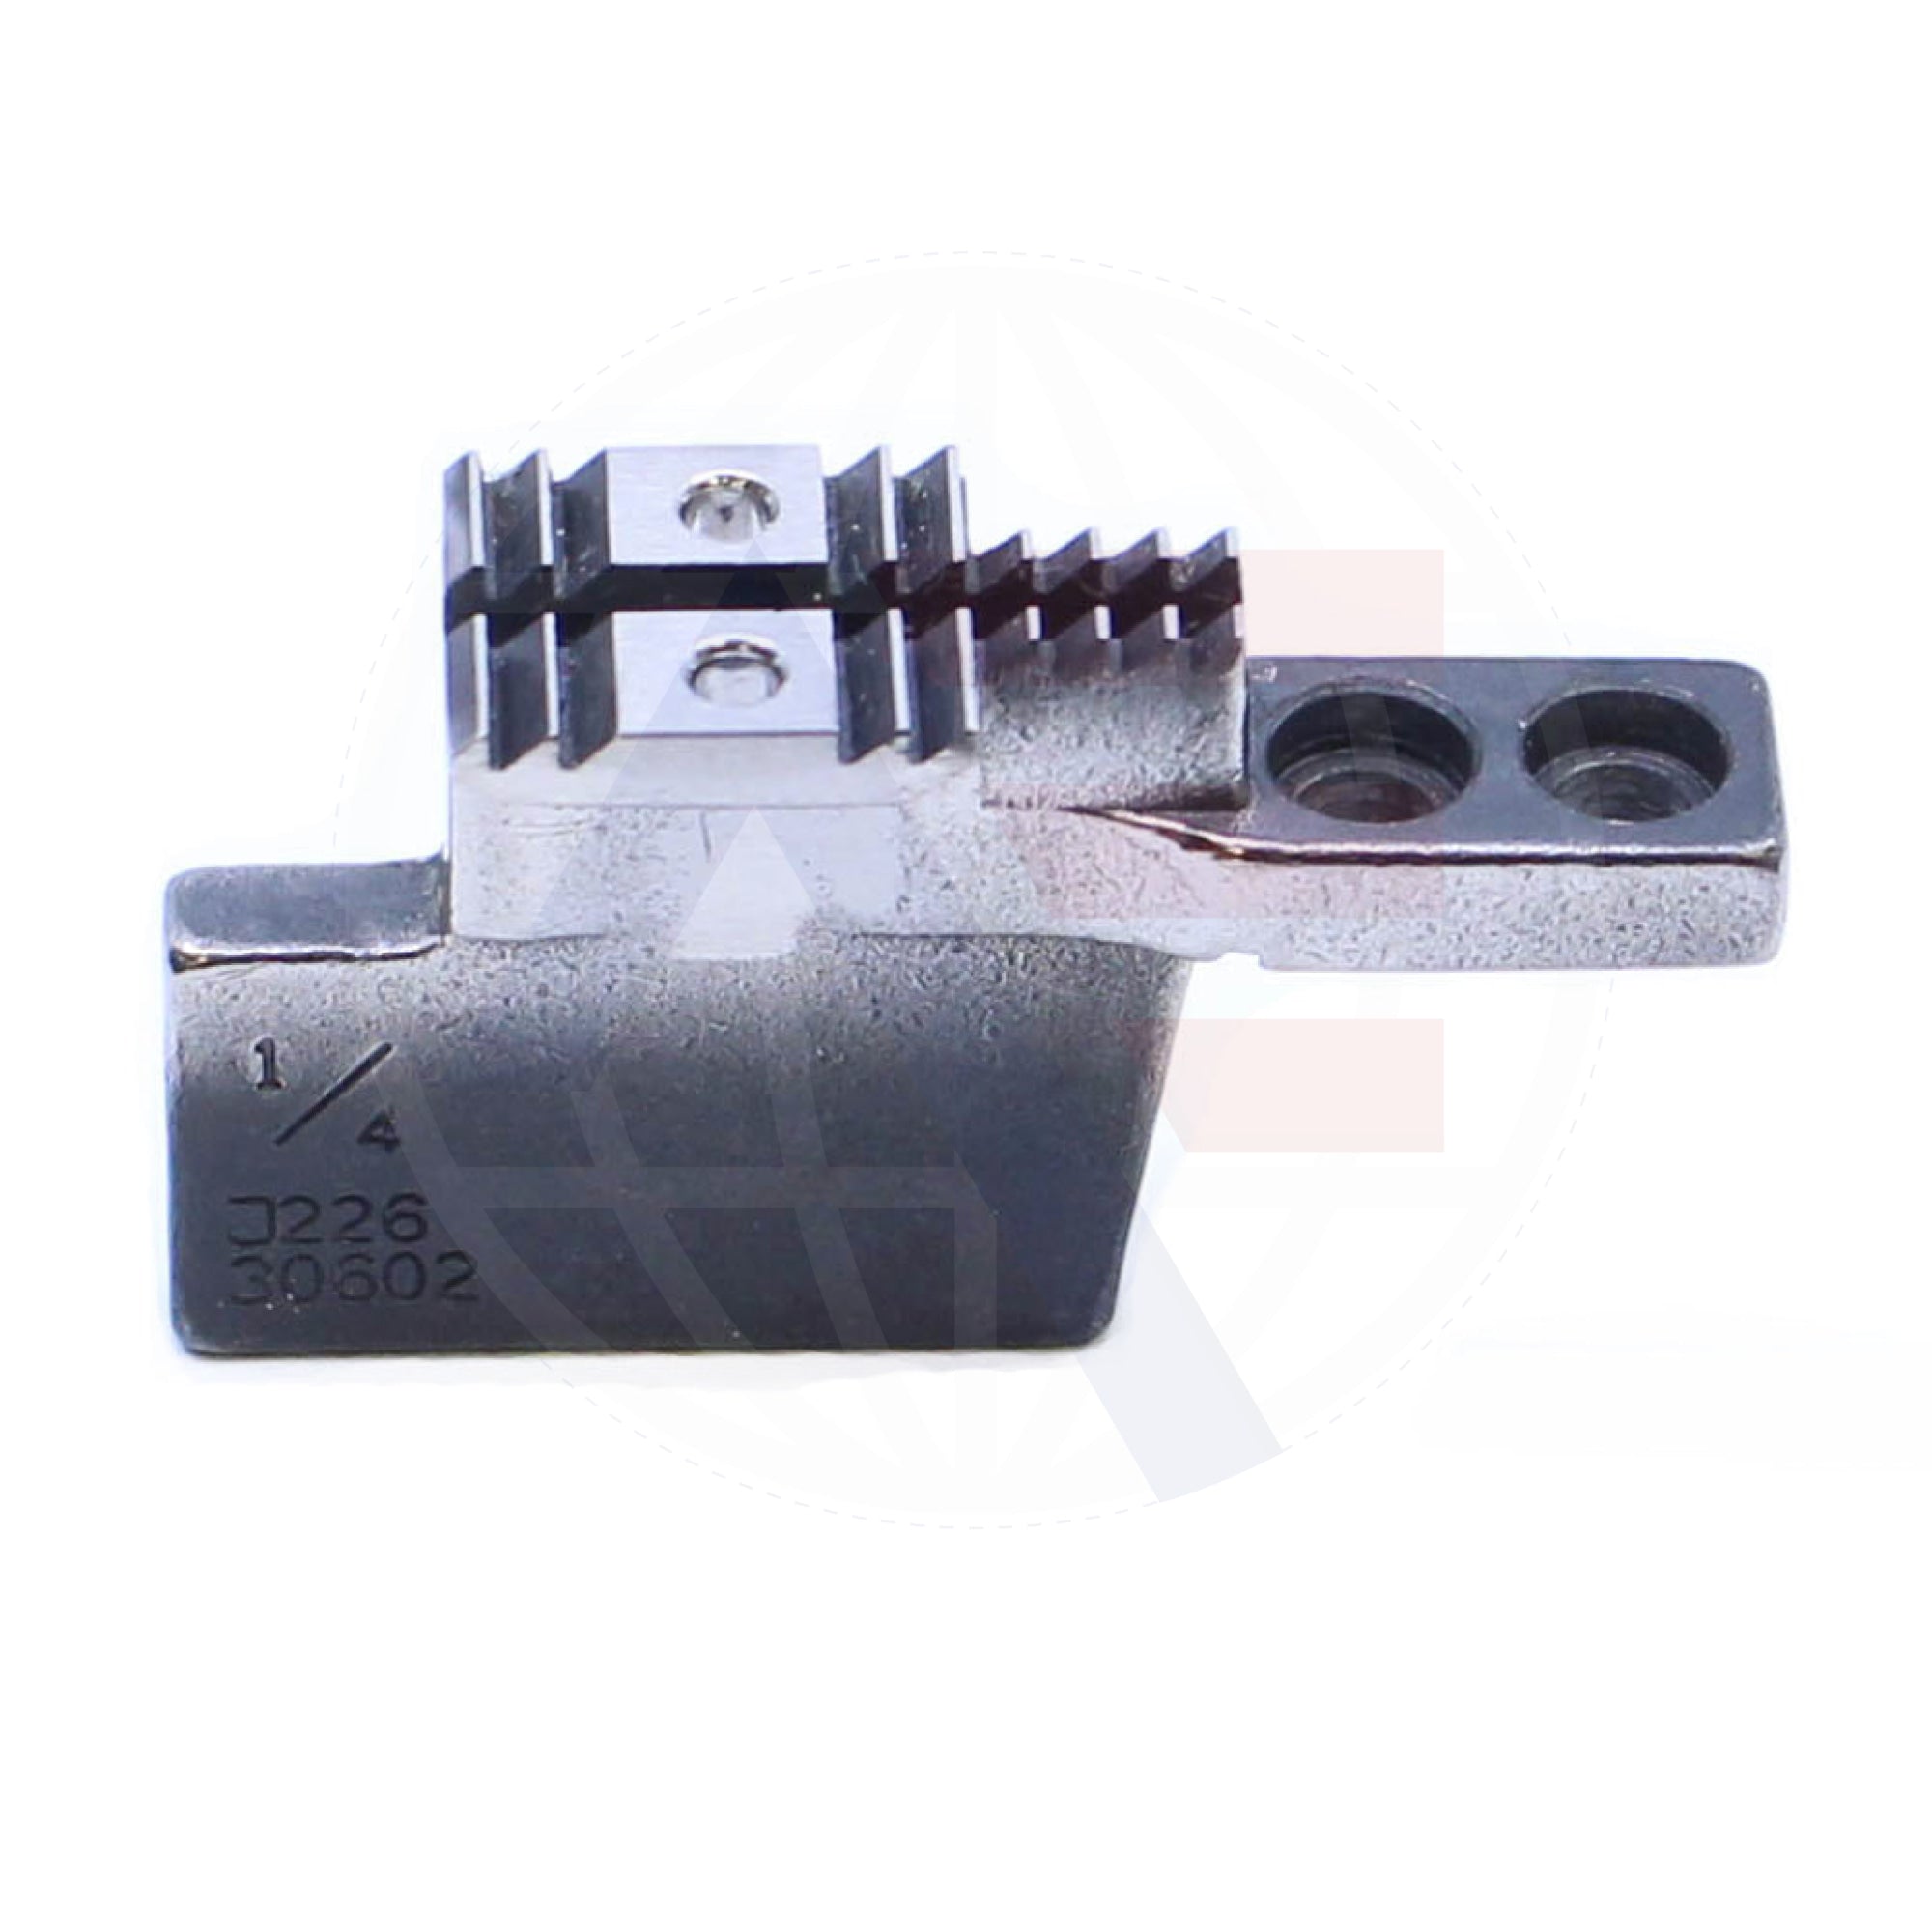 22630602 Feed Dog Sewing Machine Spare Parts